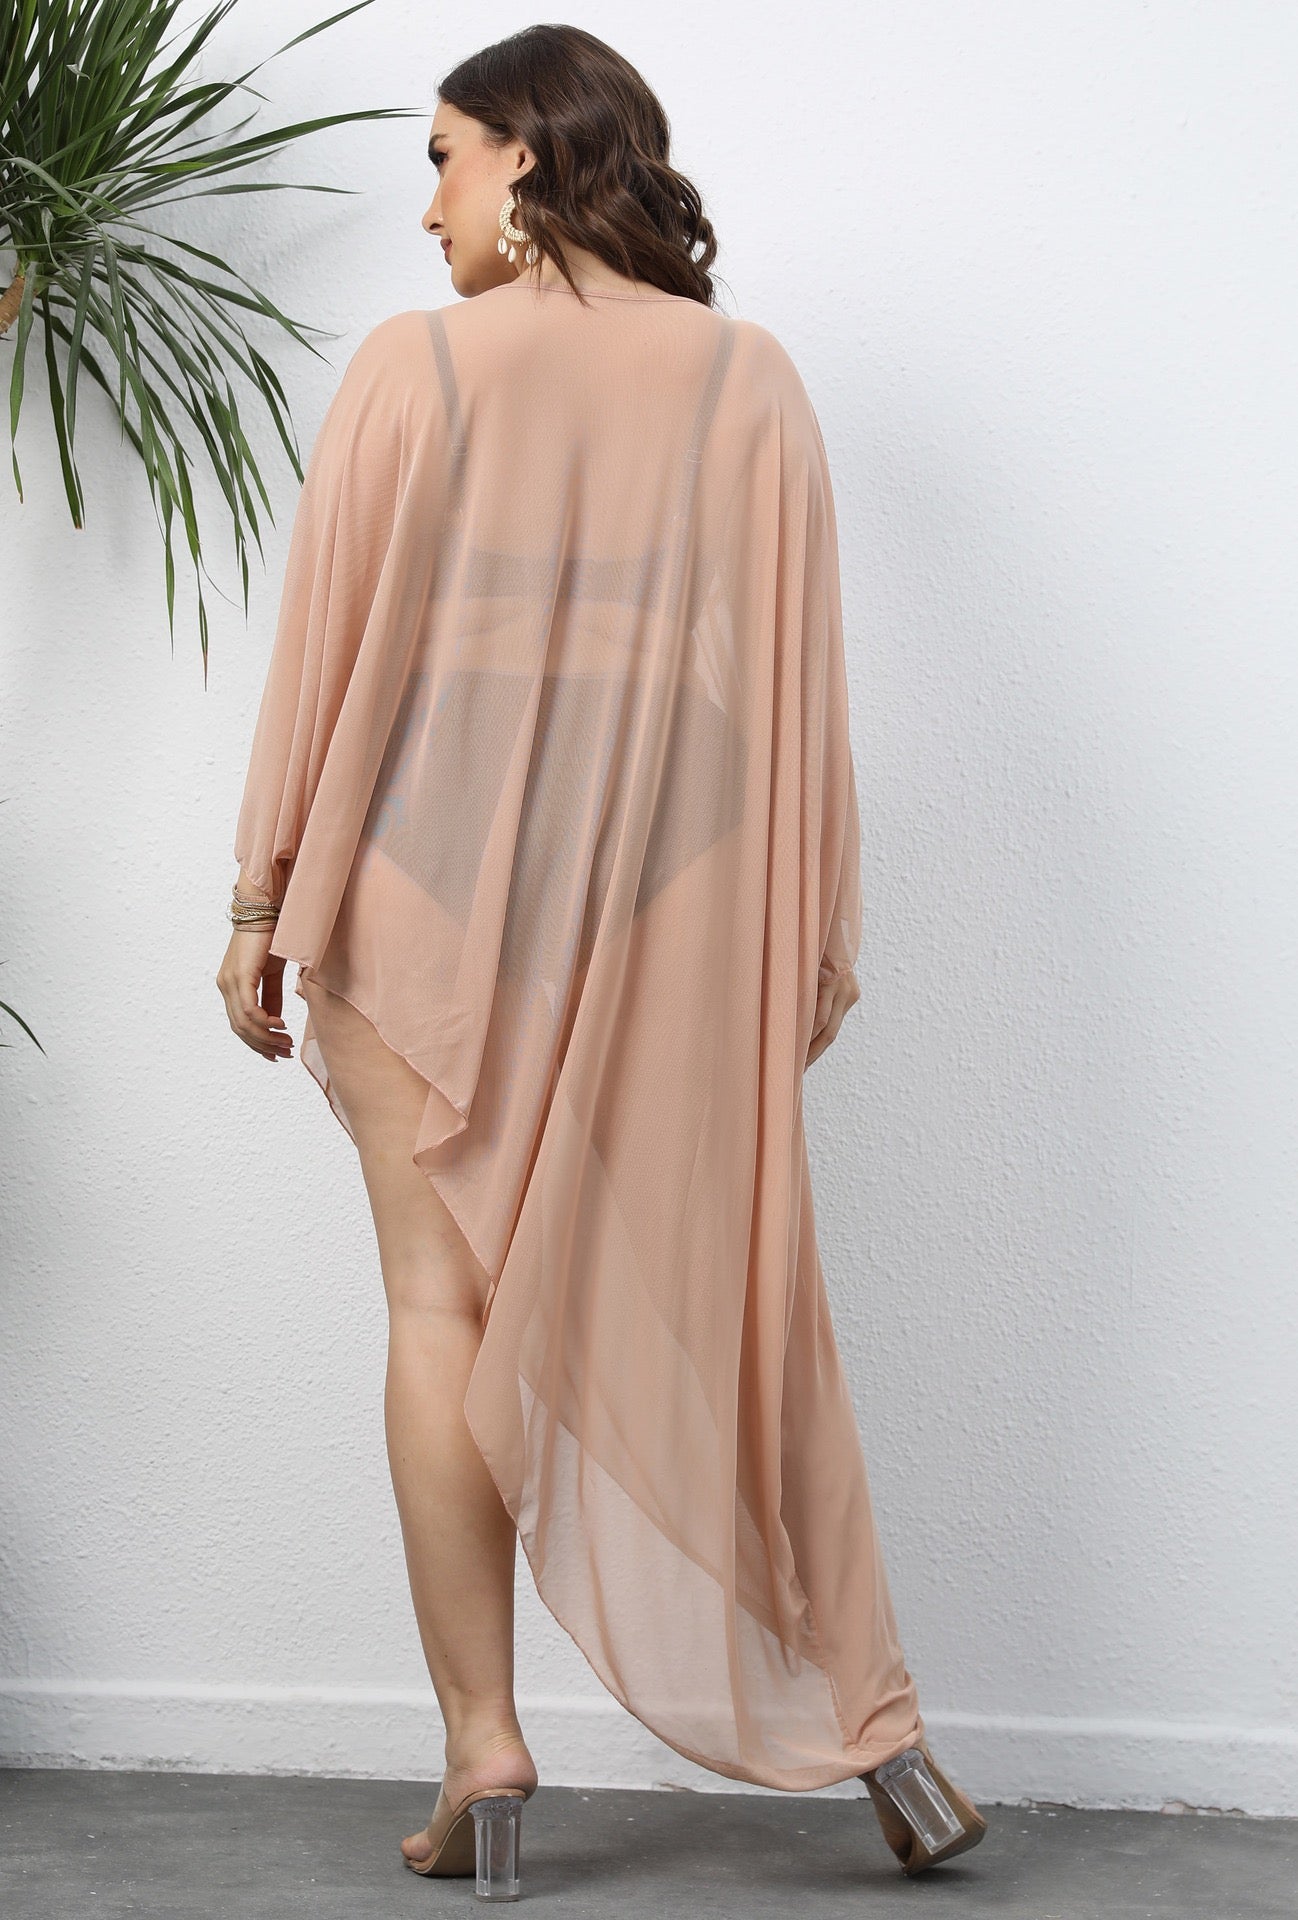 Beige Sheer Cover Up